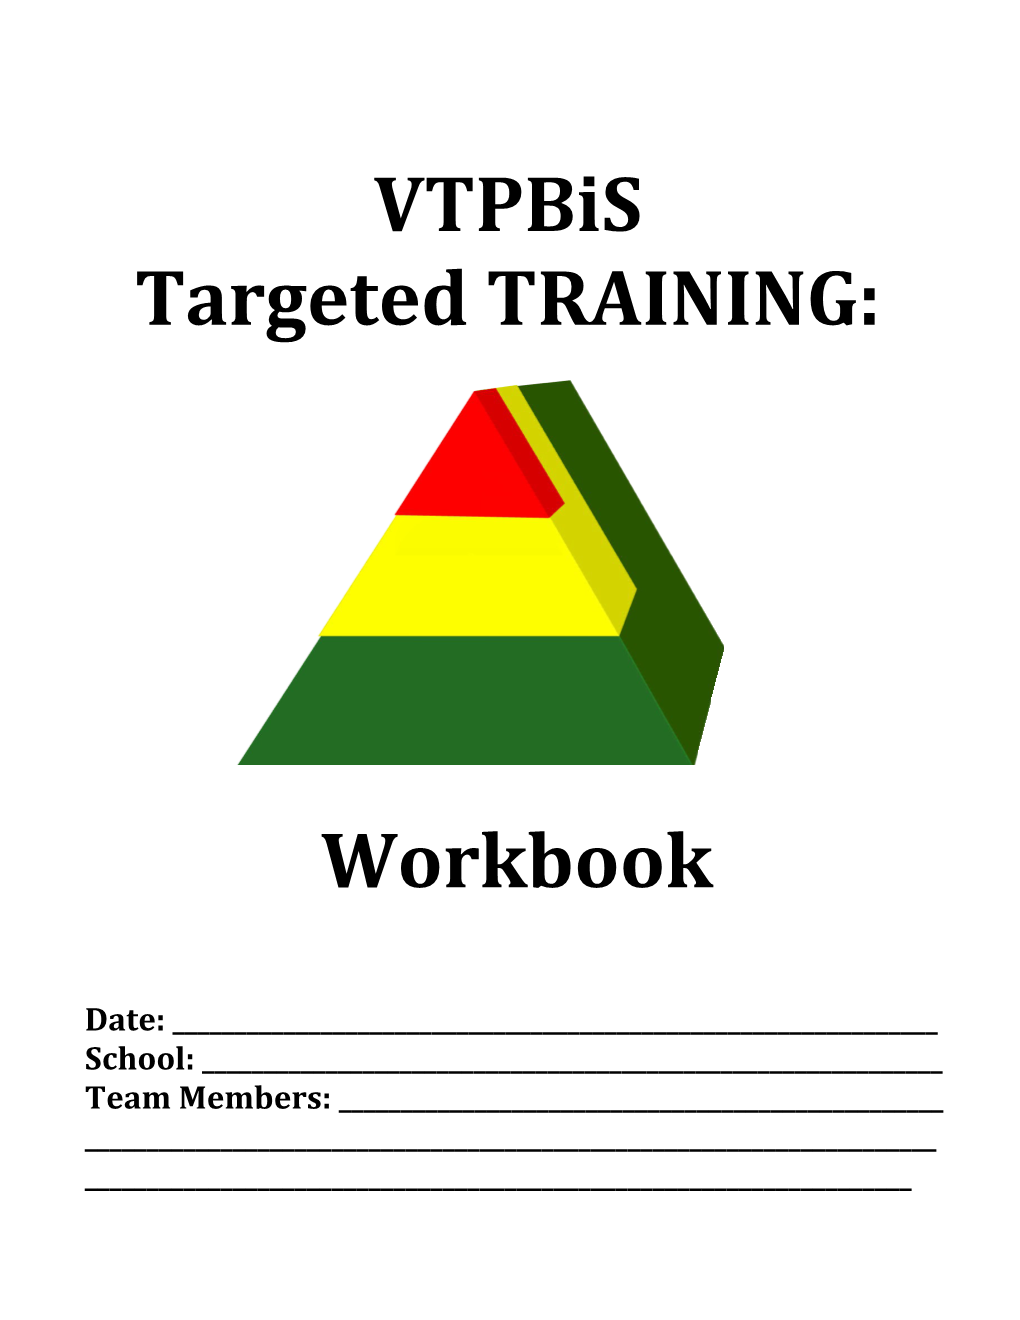 Targeted TRAINING